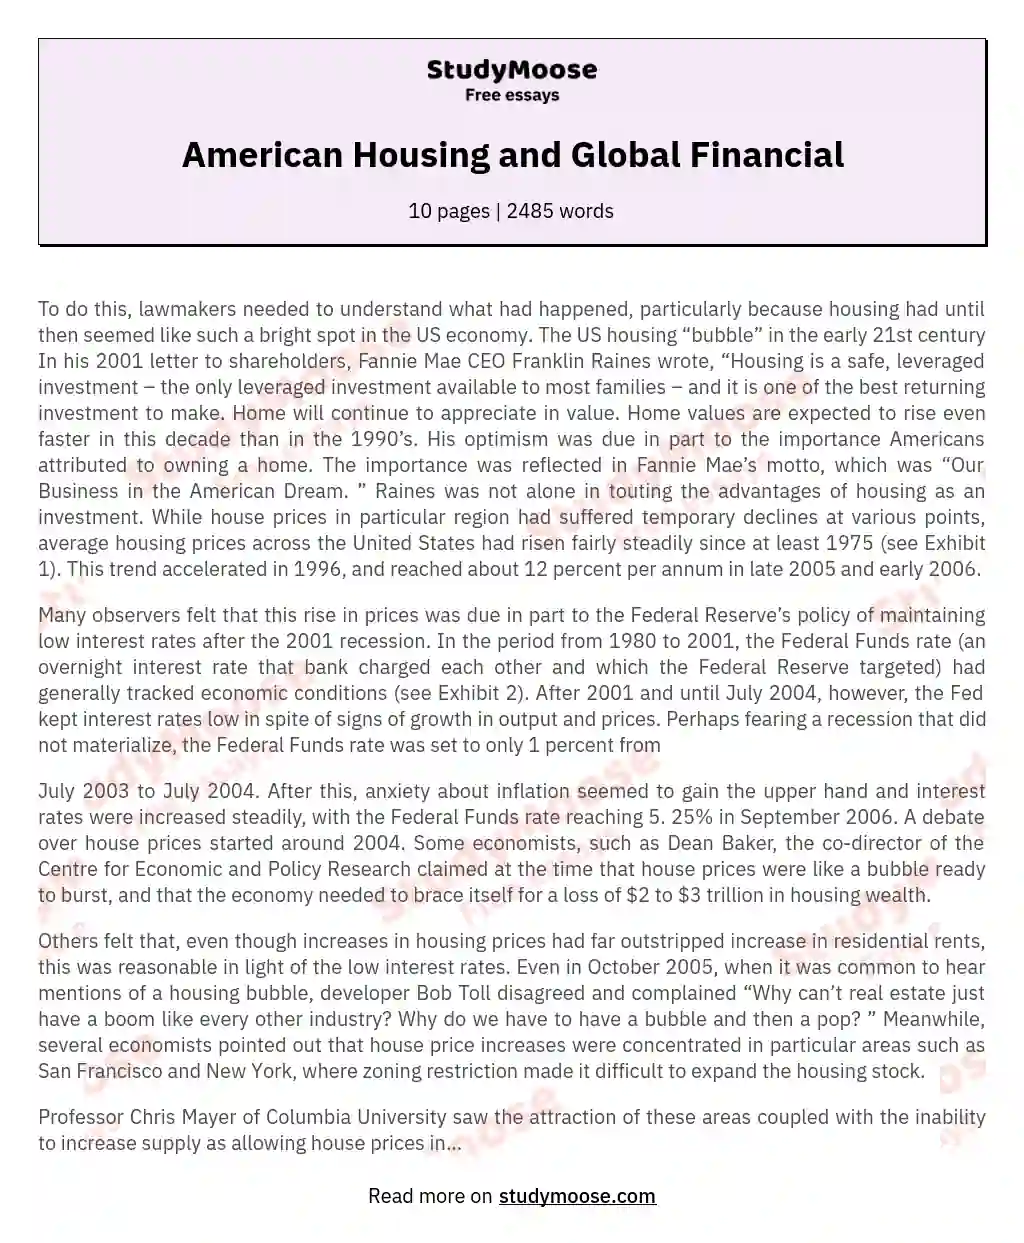 American Housing and Global Financial essay